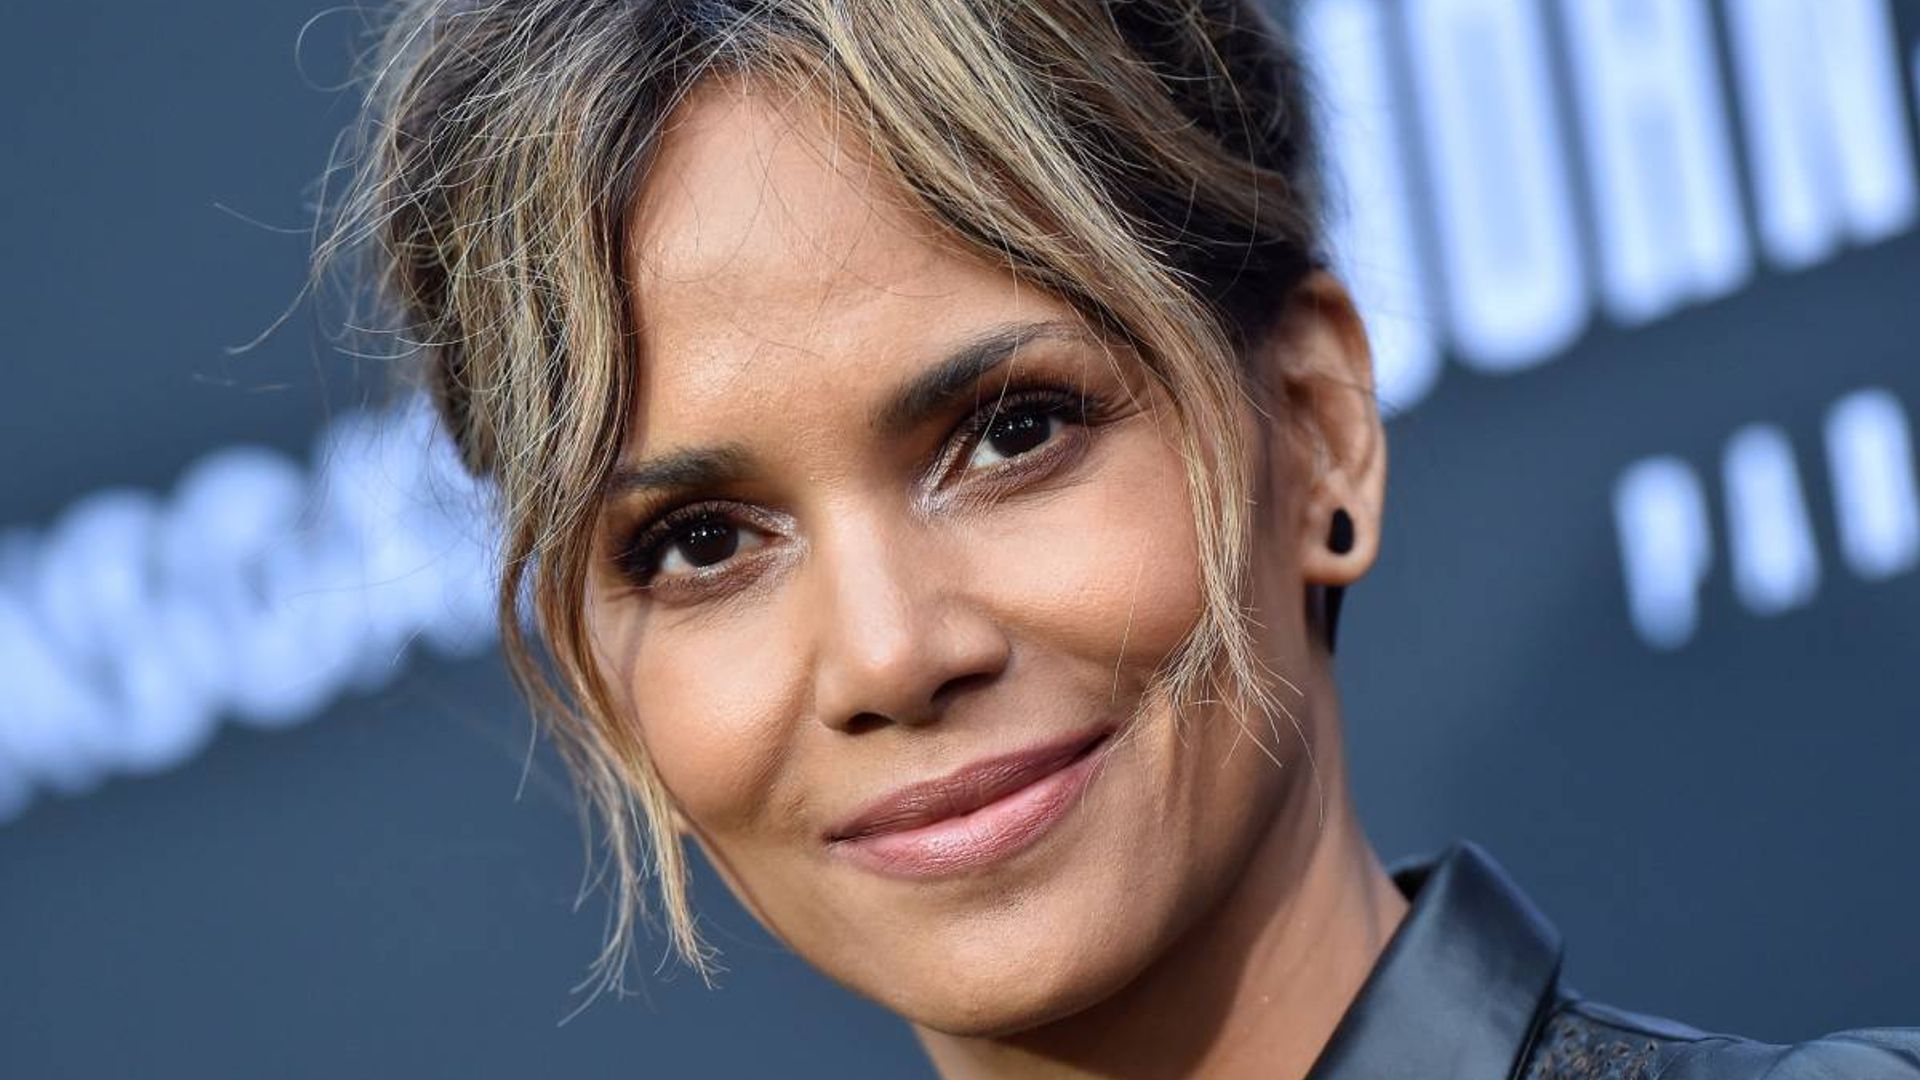 Halle Berry looks fabulous in metallic suit during red carpet appearance